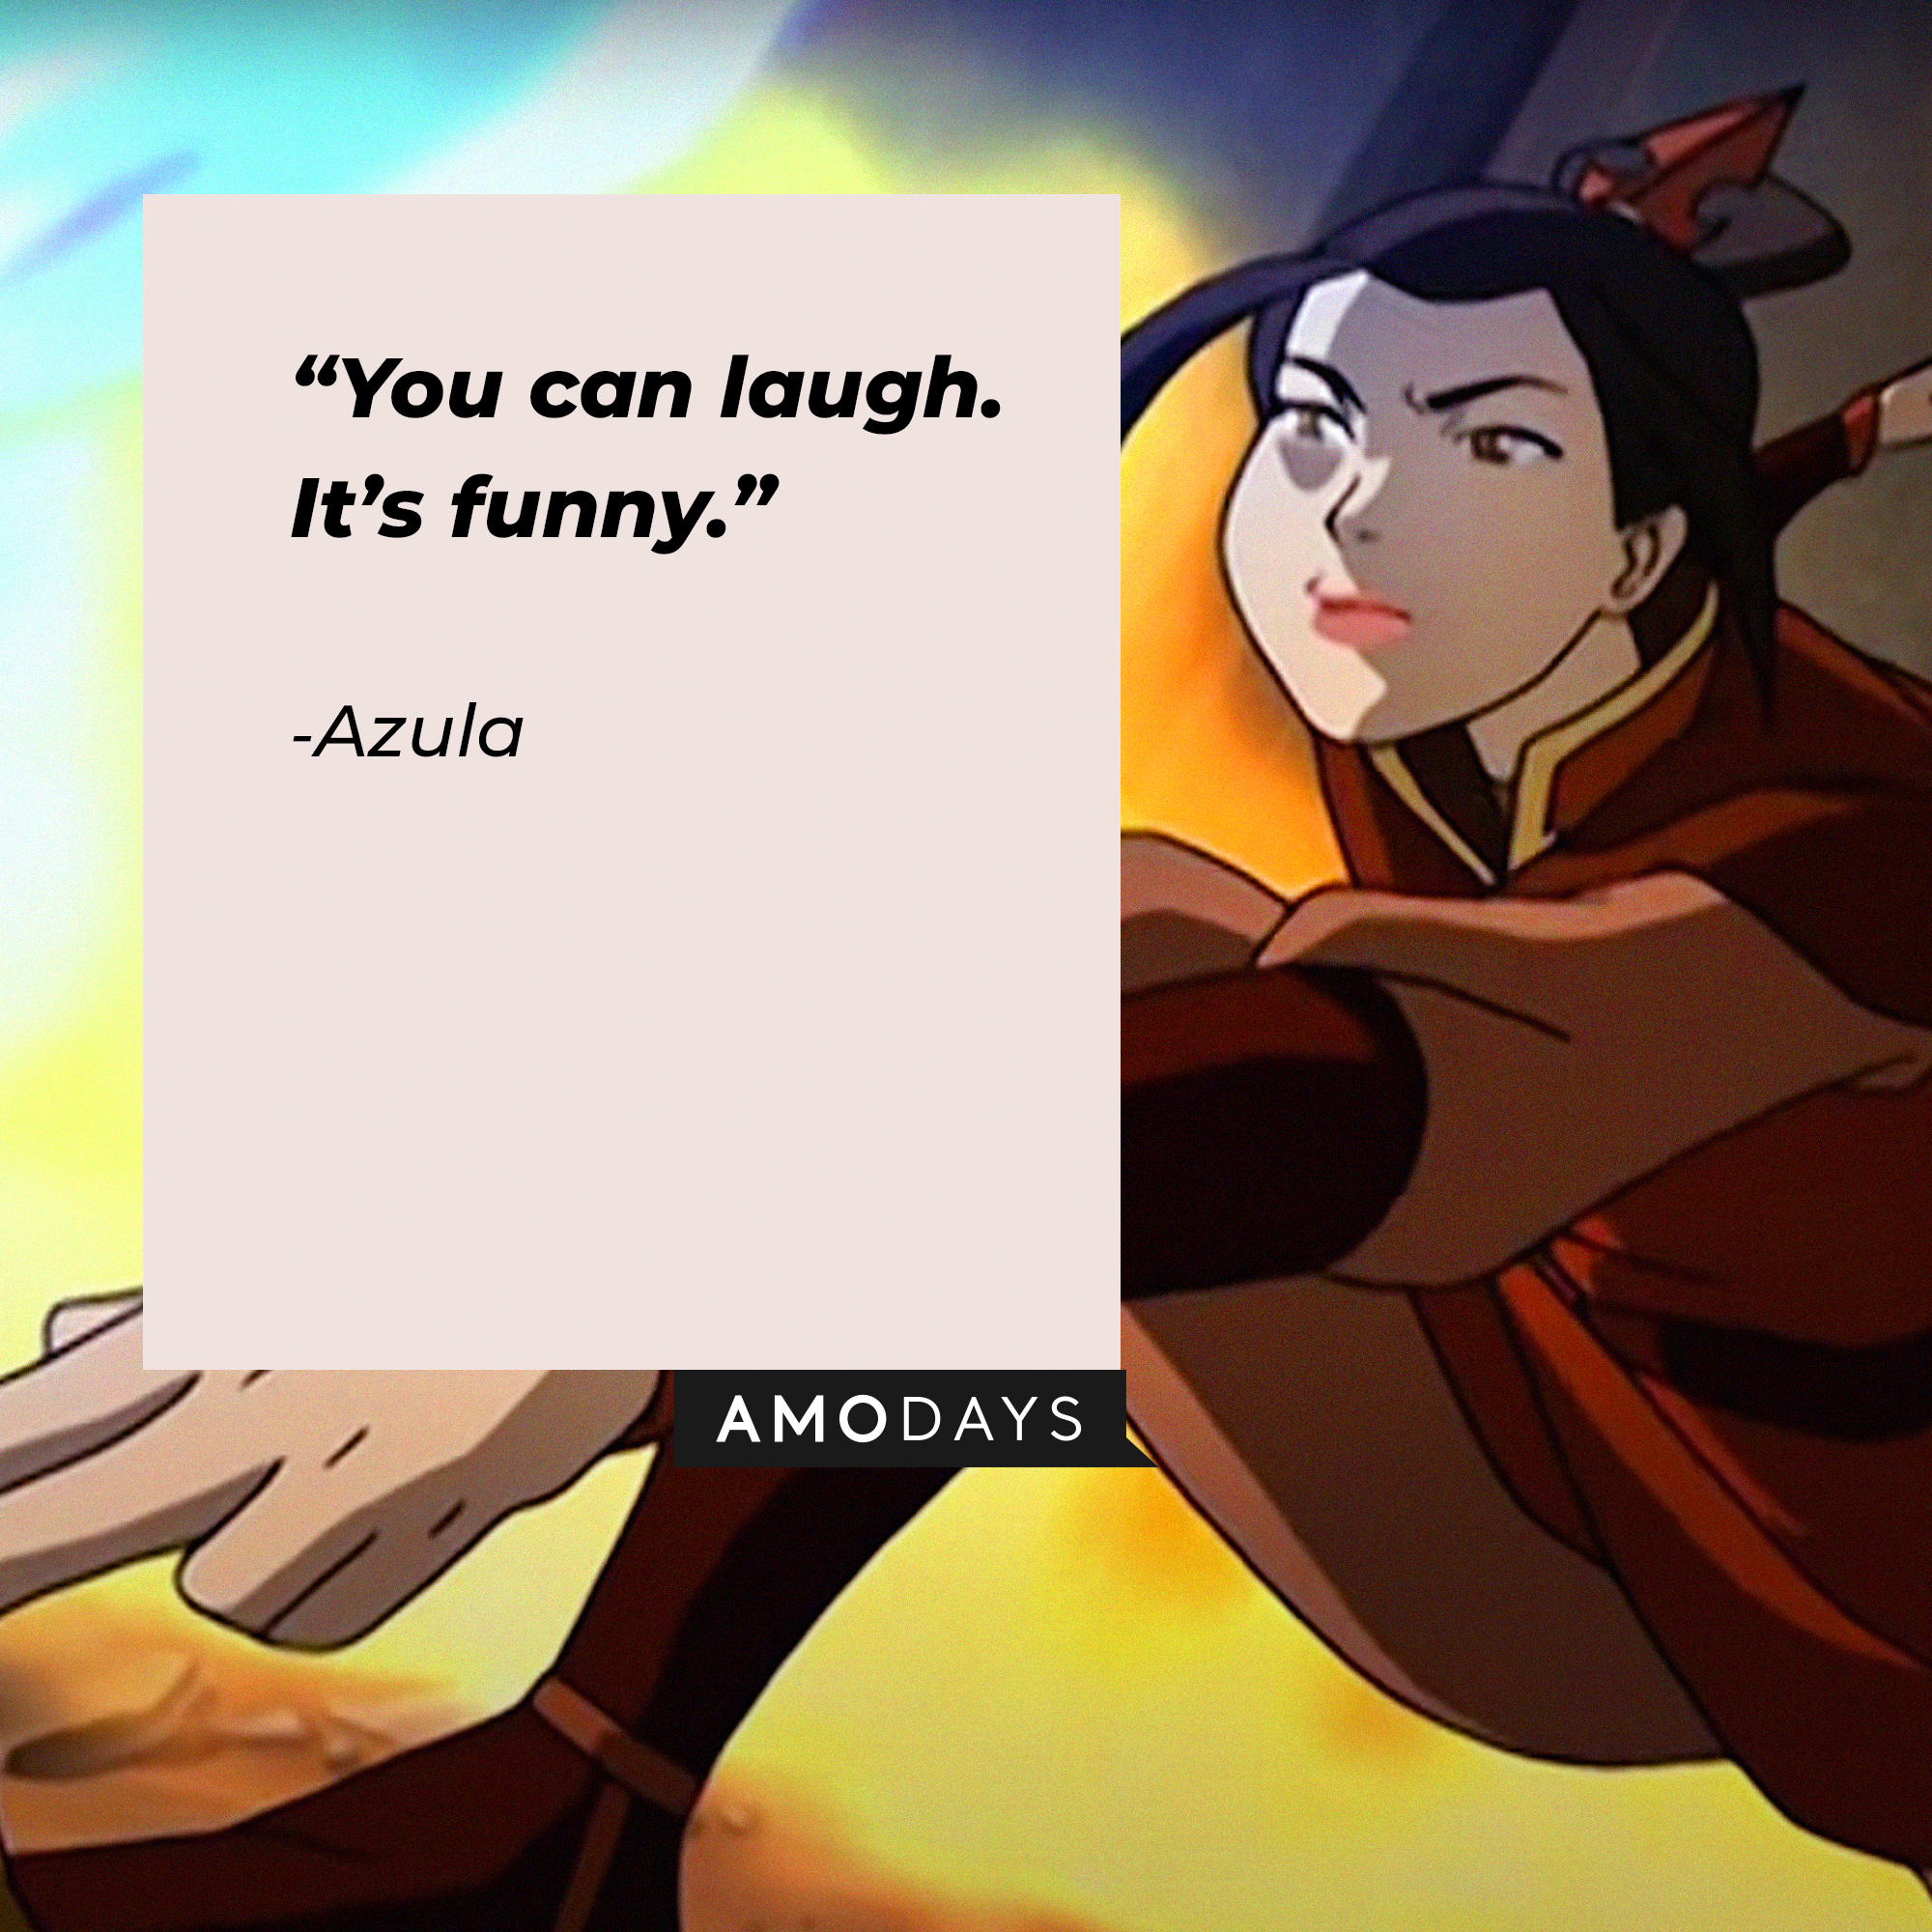 Azula's quote: “You can laugh. It’s funny.” | Source: youtube.com/TeamAvatar